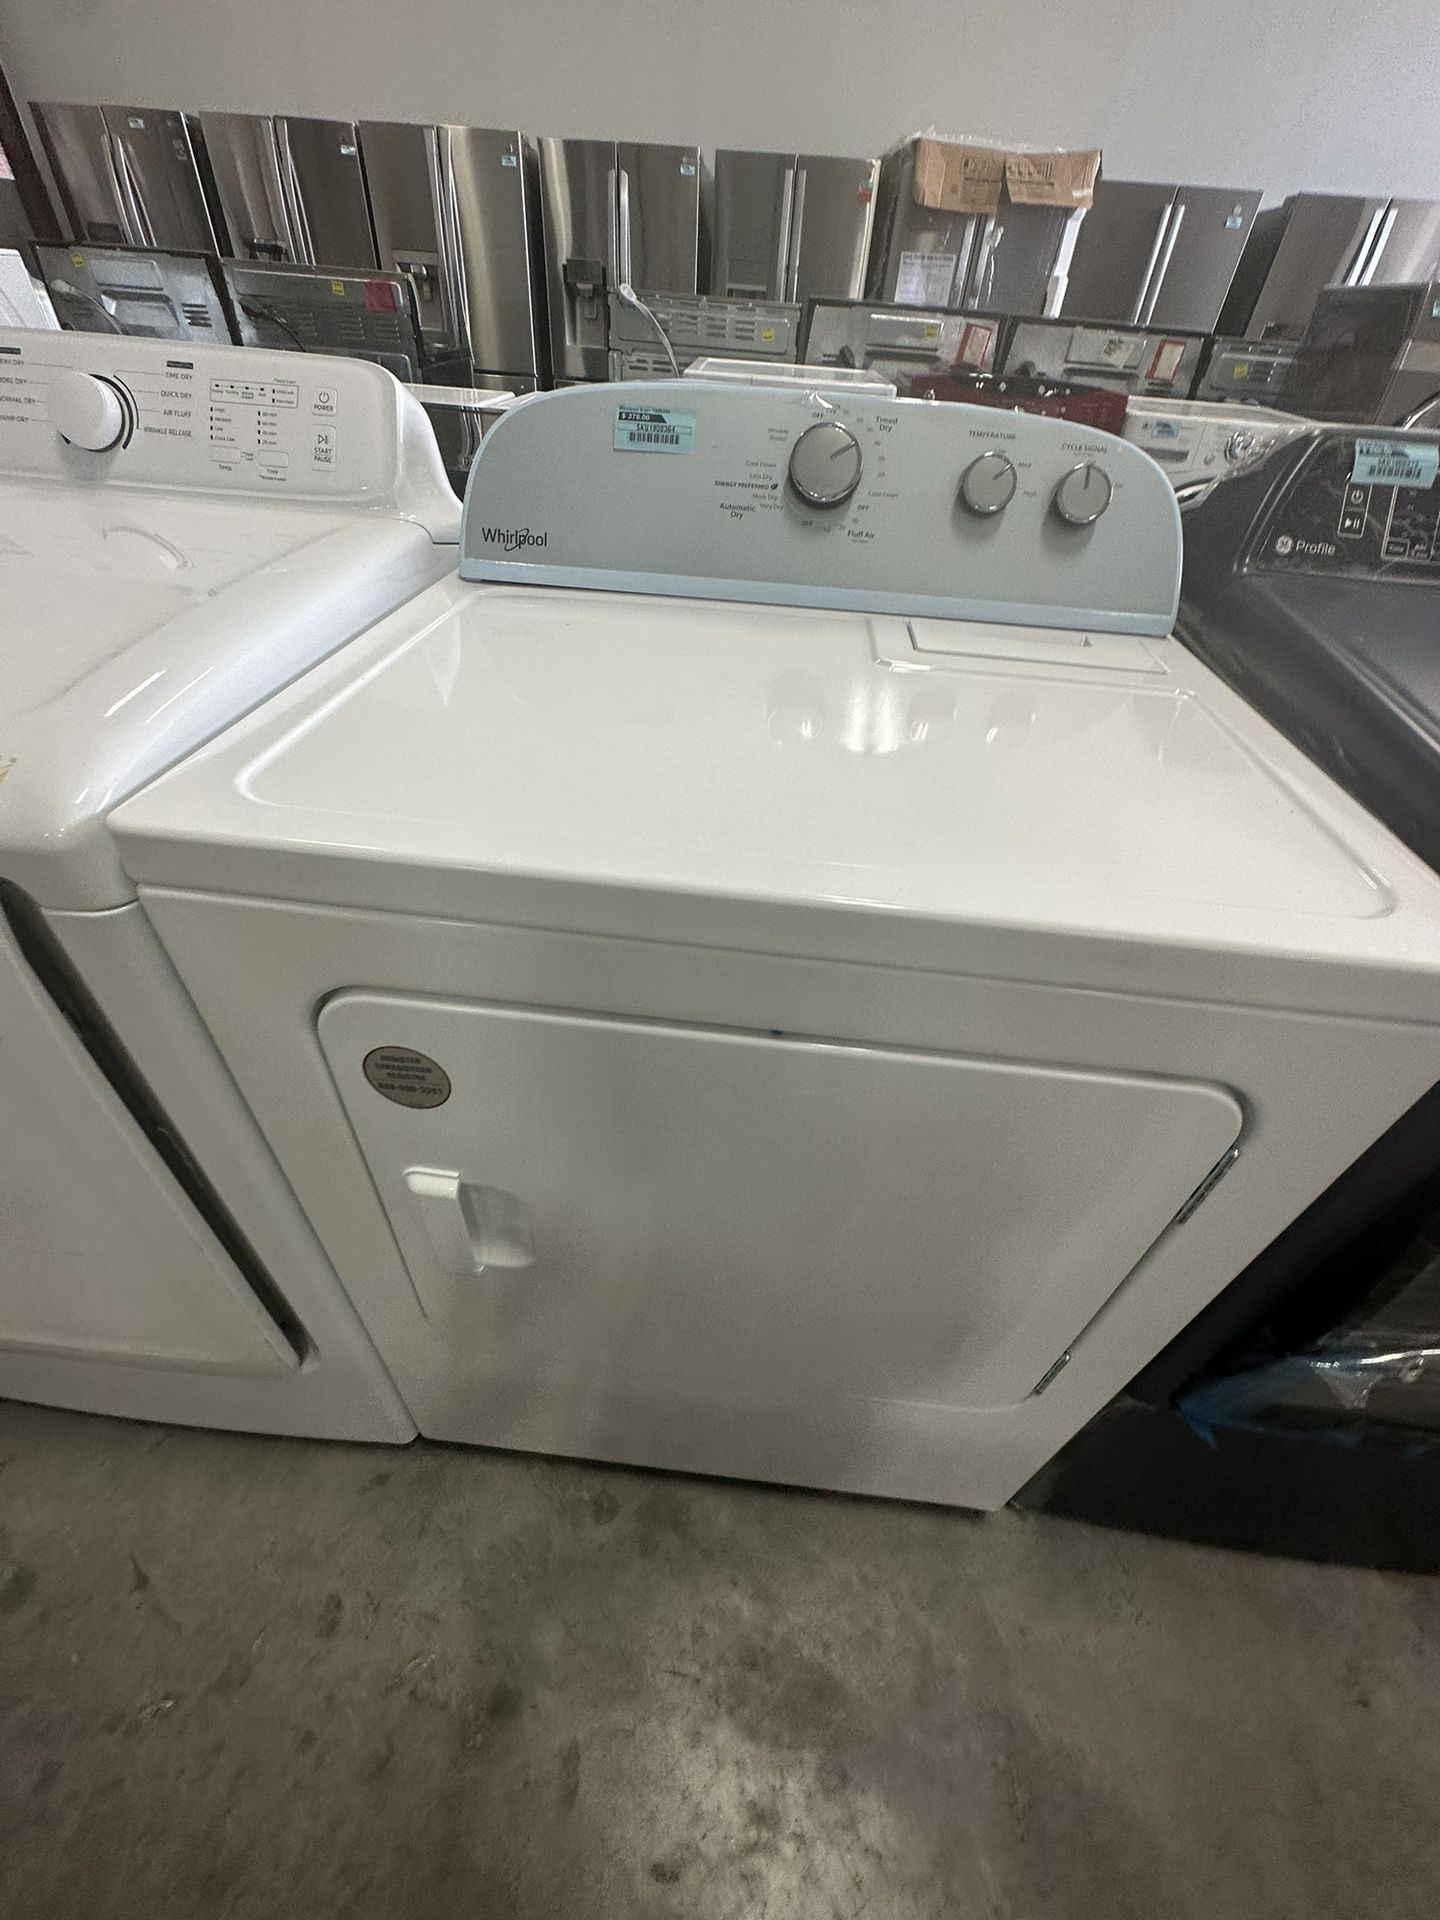 New Whirlpool Electric Dryer Scratch & dent 